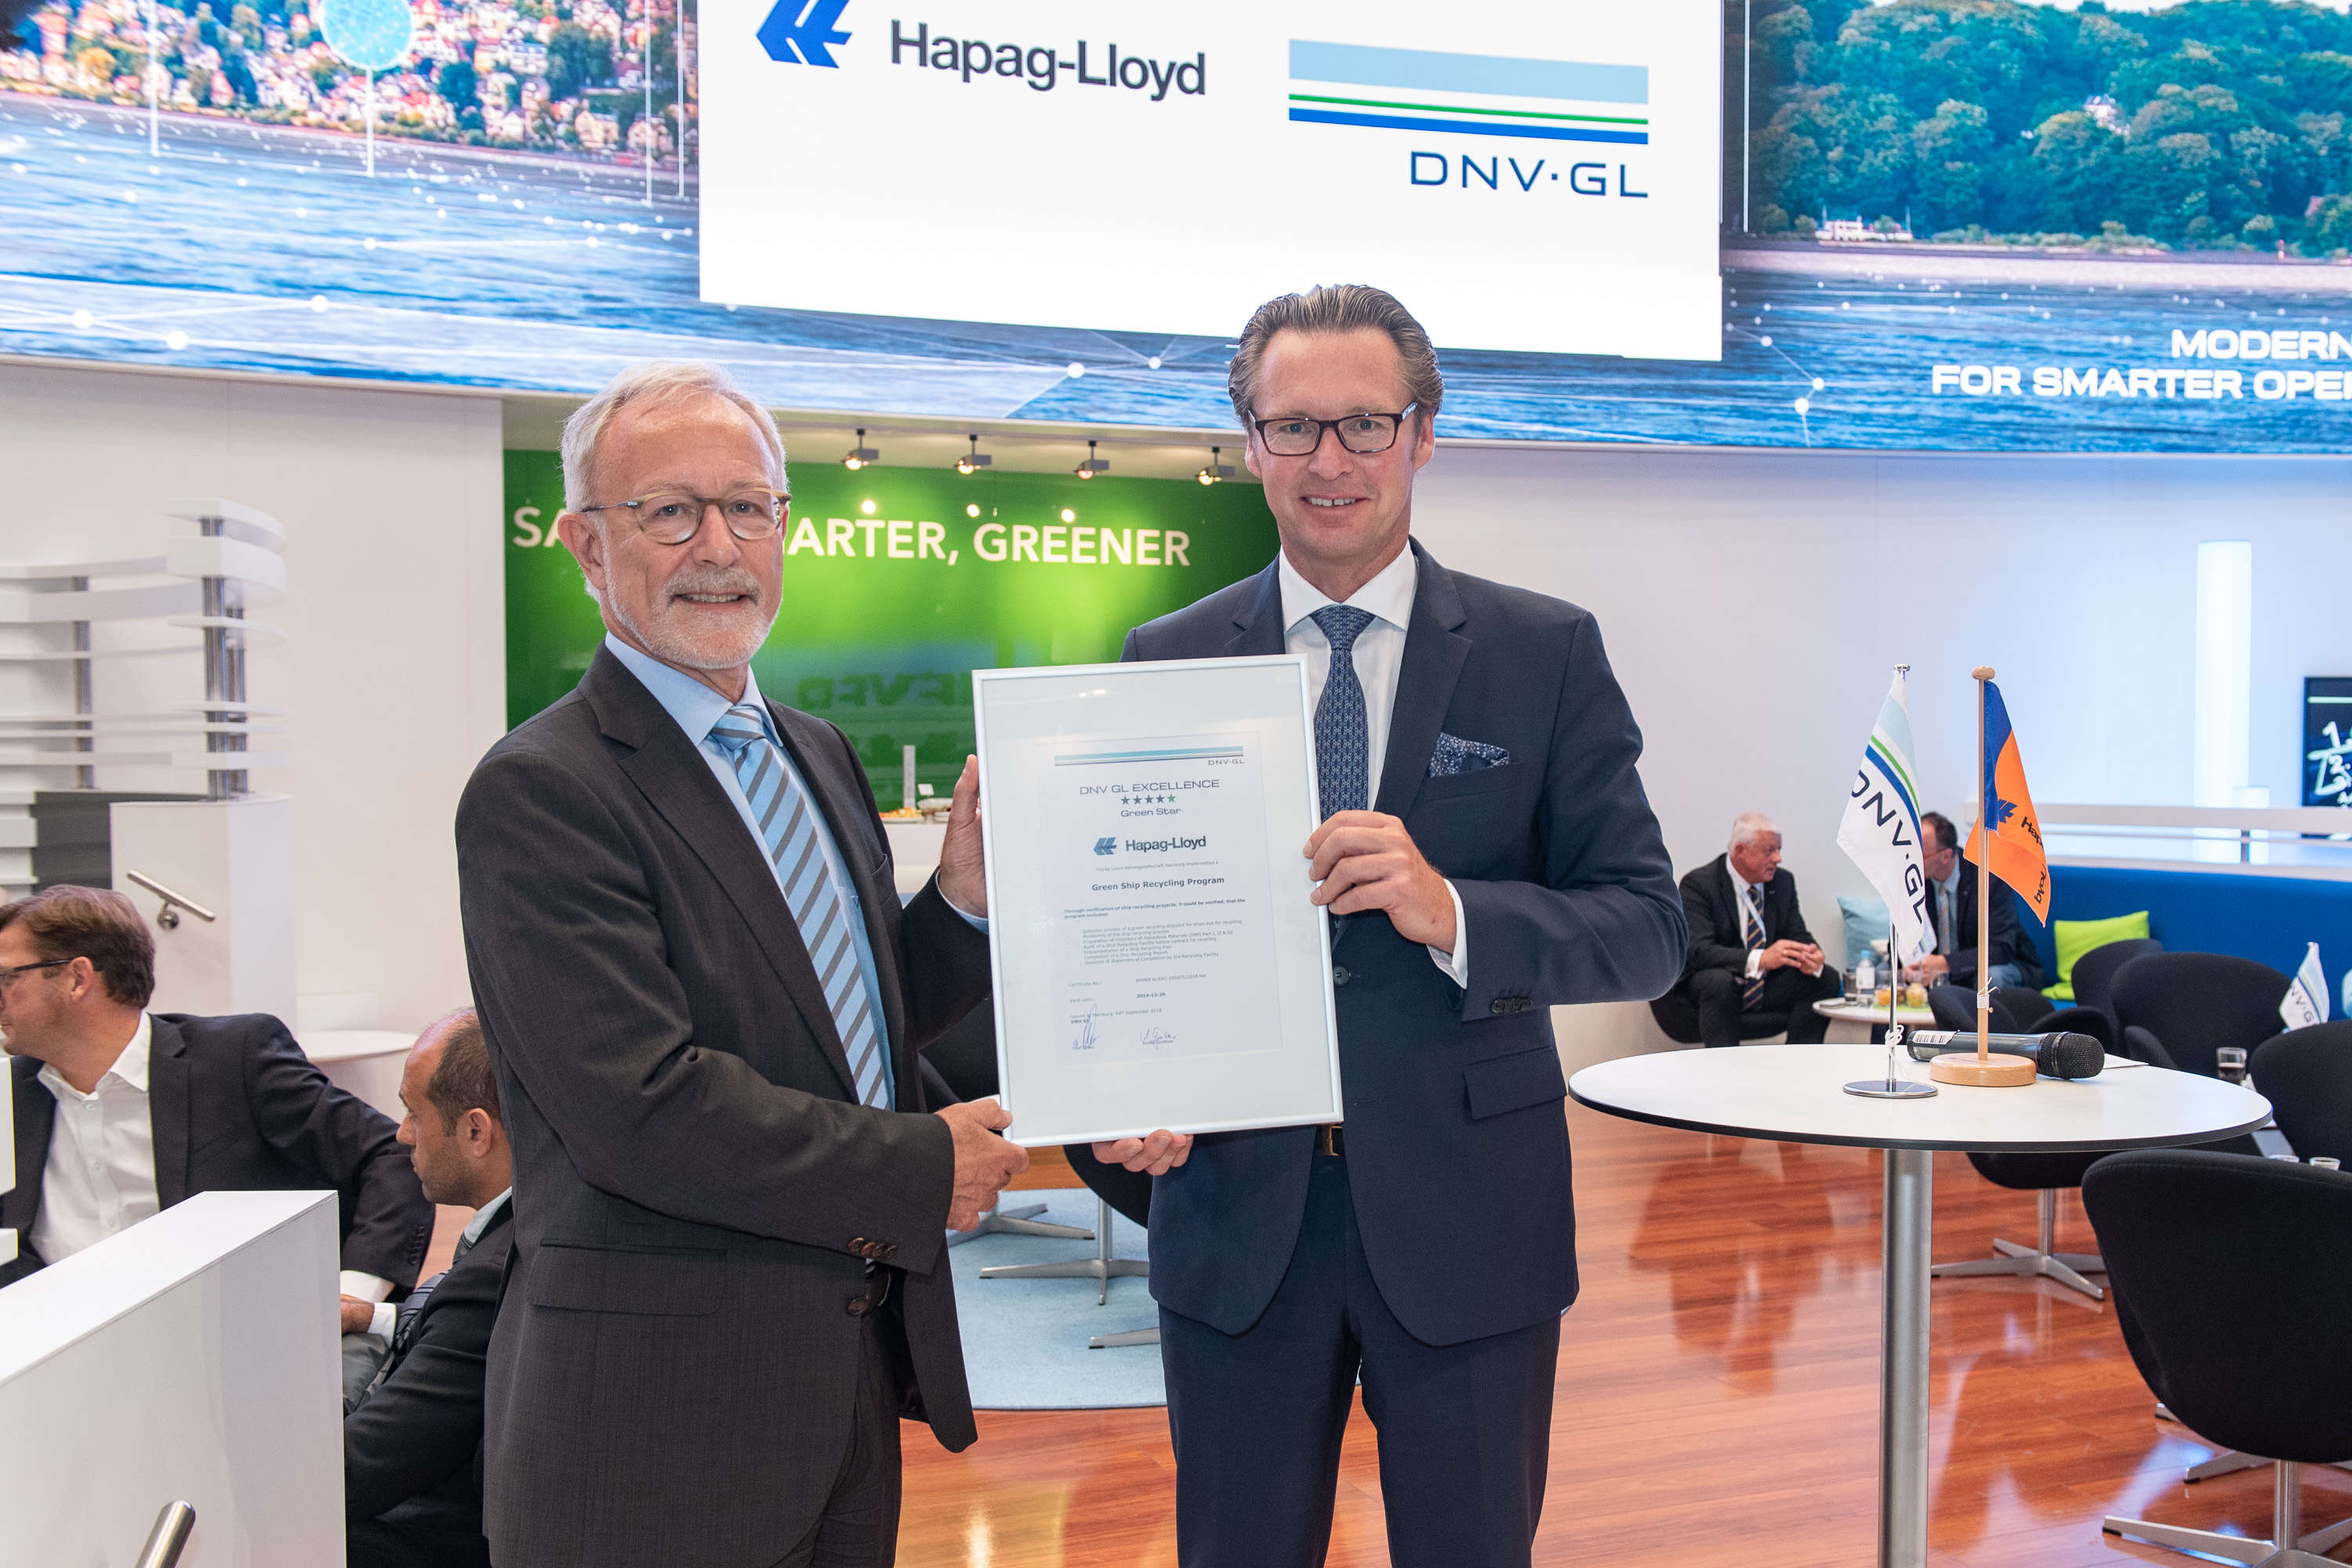 DNV GL awards certificate to Hapag.Lloyd for ship recycling pracices